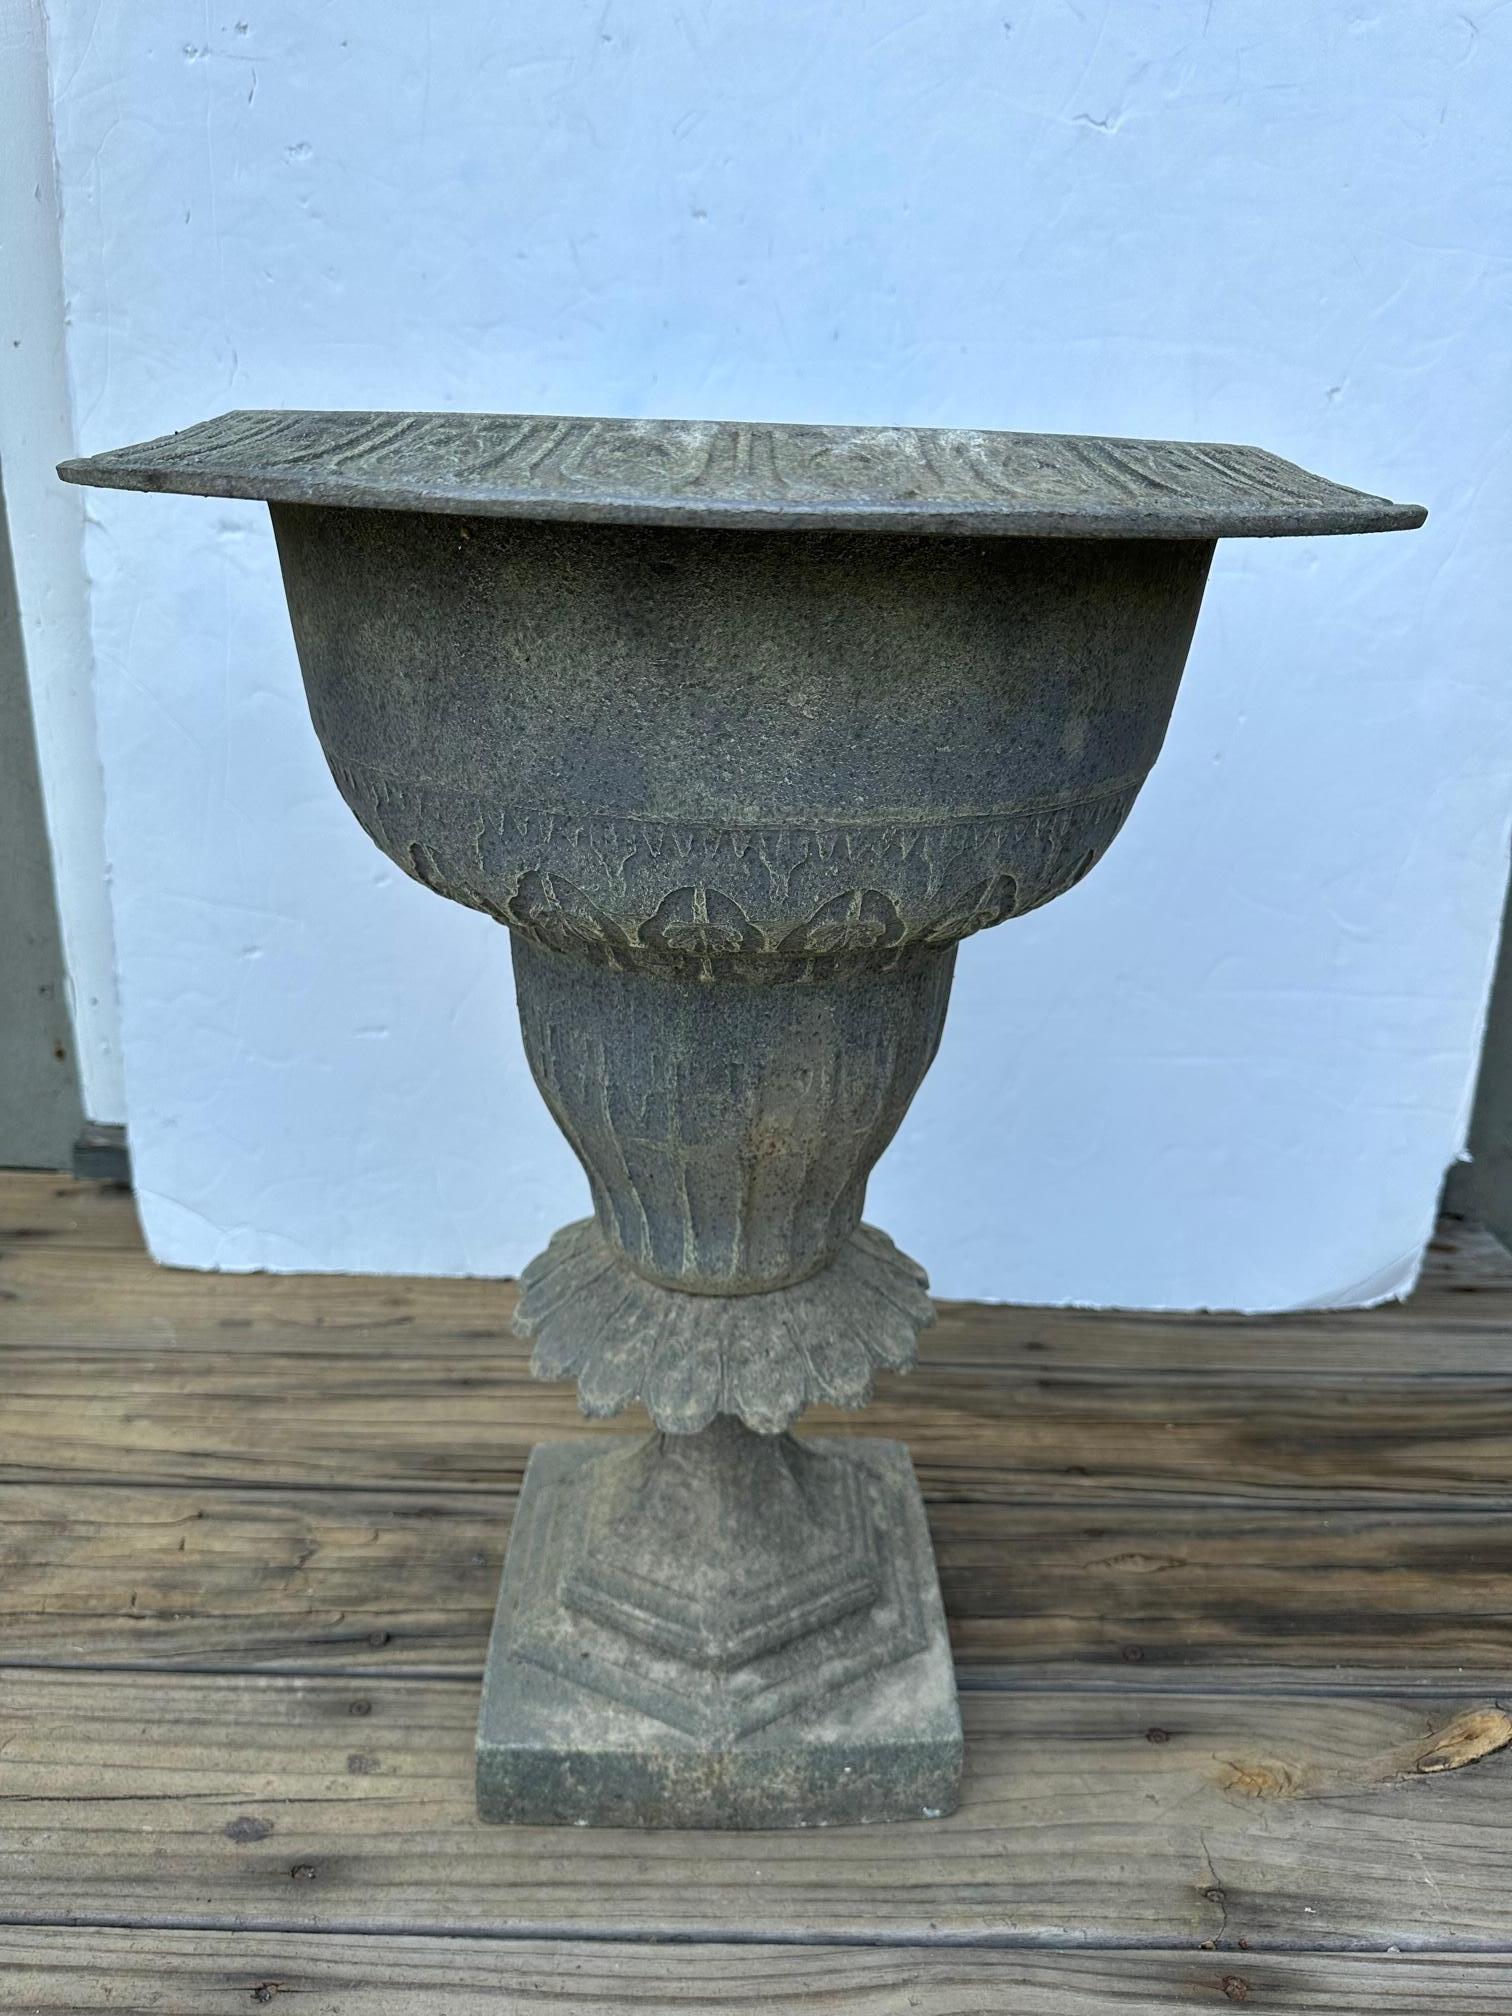 Lovely vintage gray metal round urn planter having neoclassical designs around the top periphery and 9